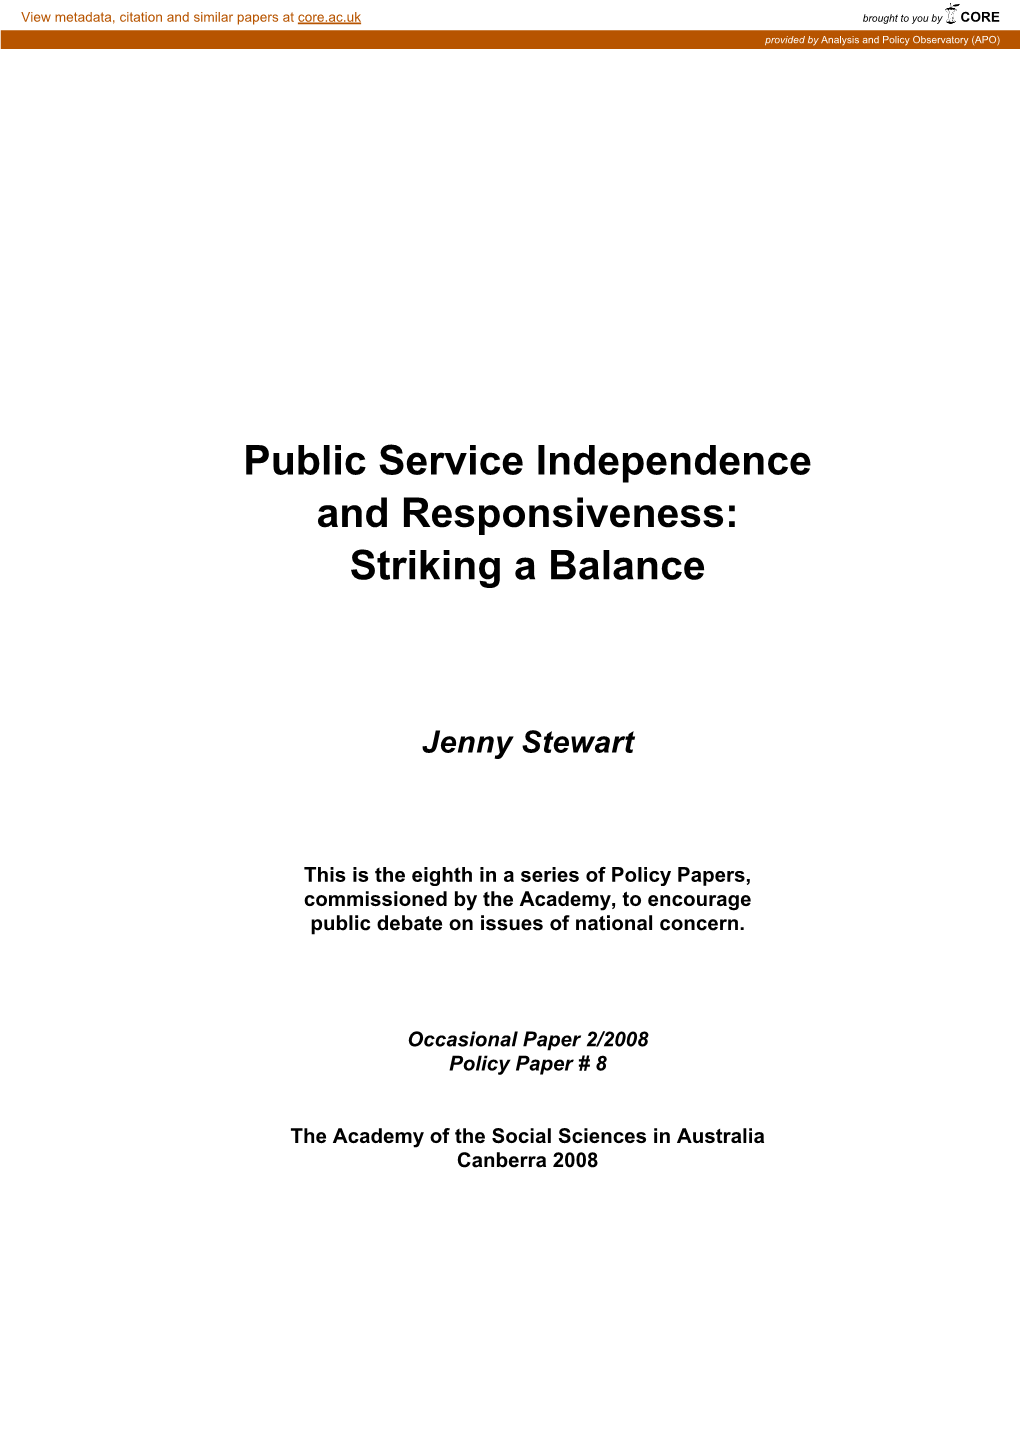 Public Service Independence and Responsiveness: Striking a Balance